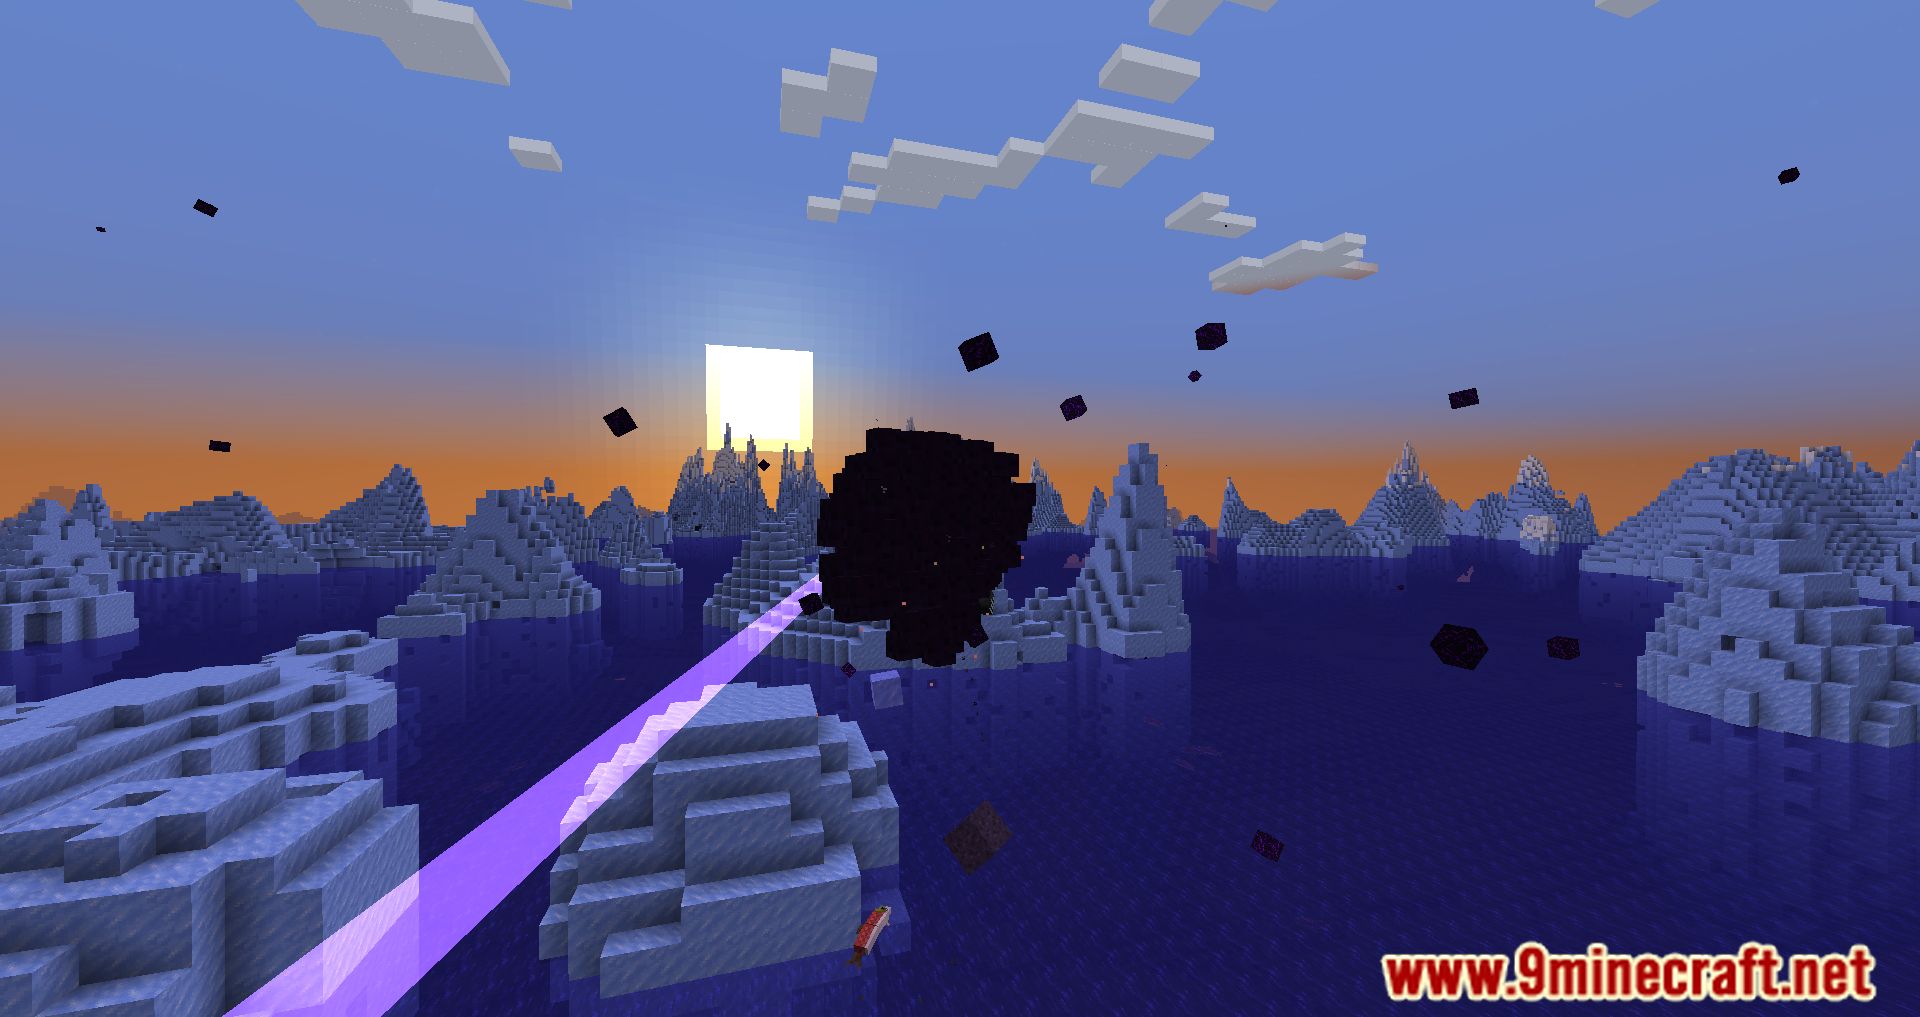 Wither Storm Mod 1.8.9 [More Updates coming Soonfinally] [Images For  Crafting Coming soon] - WIP Mods - Minecraft Mods - Mapping and Modding:  Java Edition - Minecraft Forum - Minecraft Forum